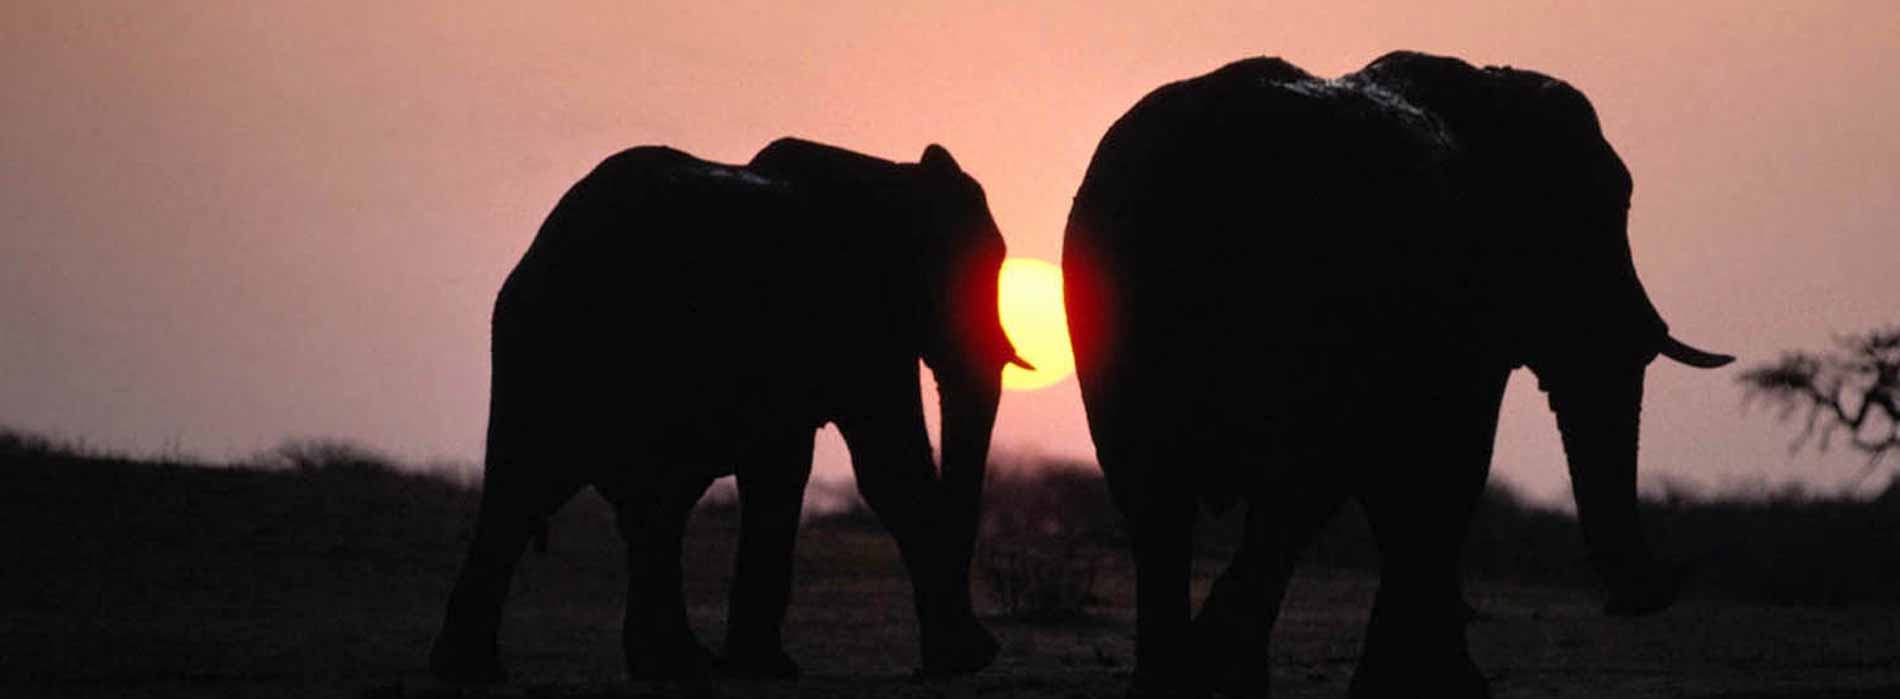 The silhouette of two elephants walking in front of a setting sun